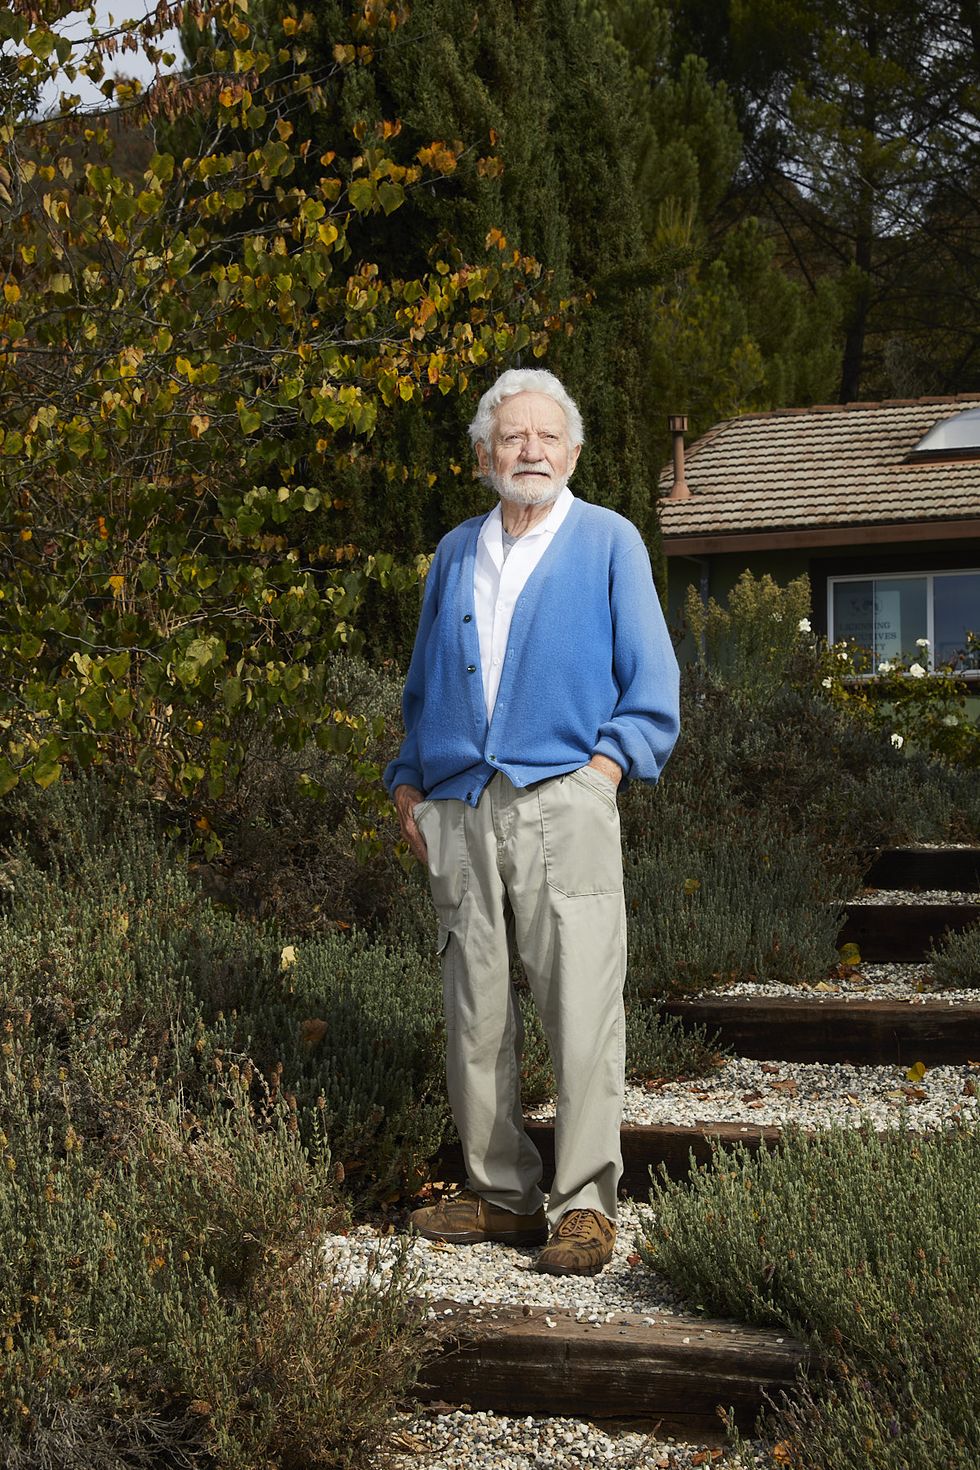 larry udell photographed in october 2021 in his home in sonoma county, california